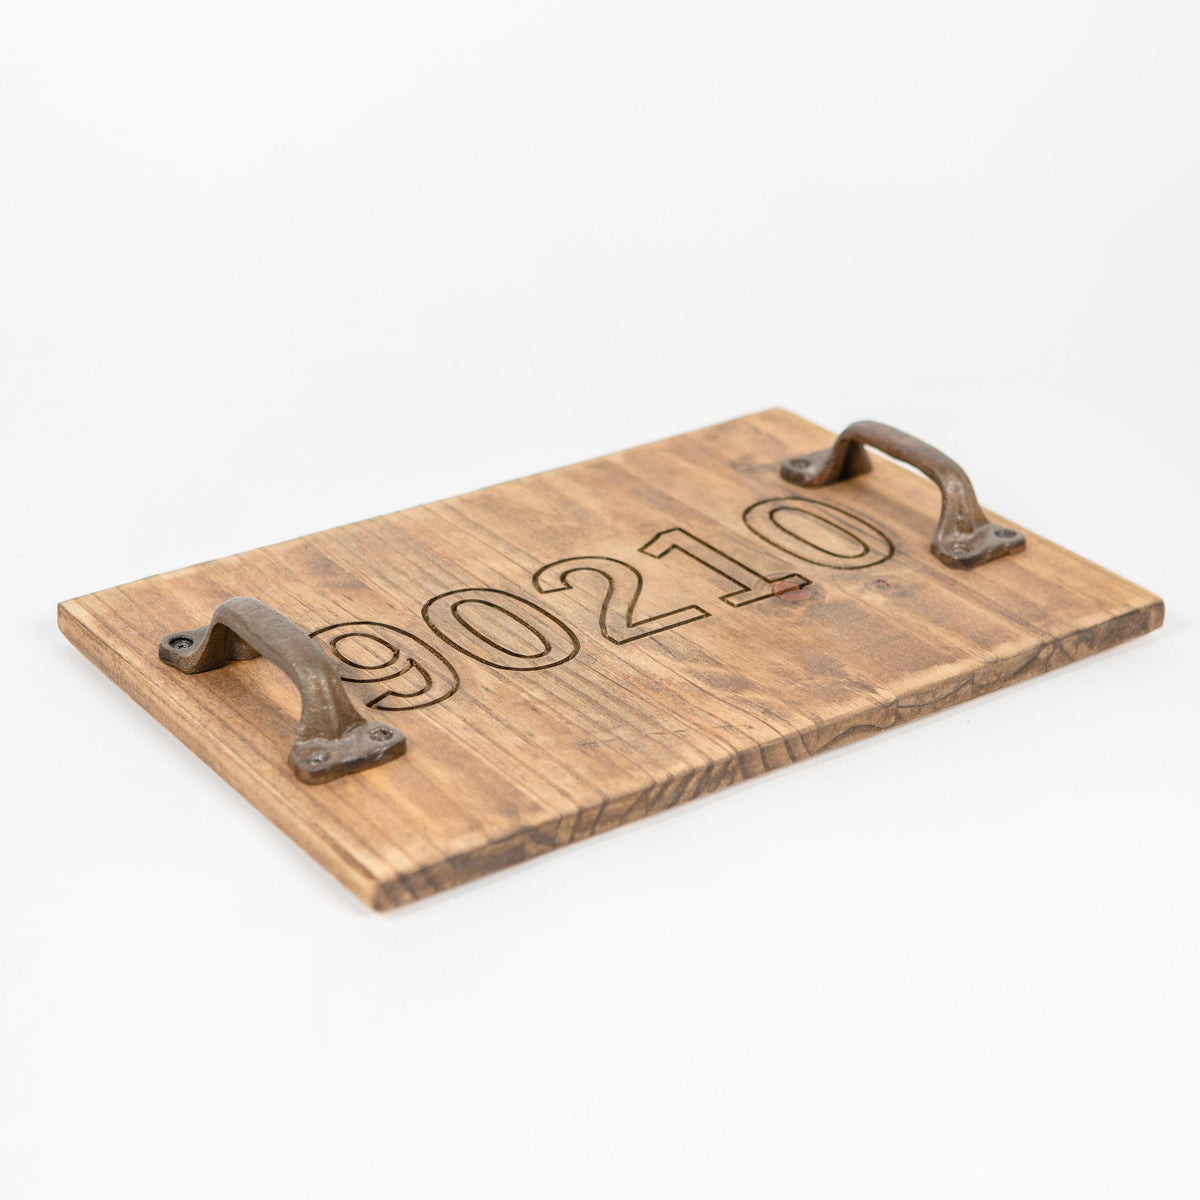 engraved zip code tray with handles grace graffiti